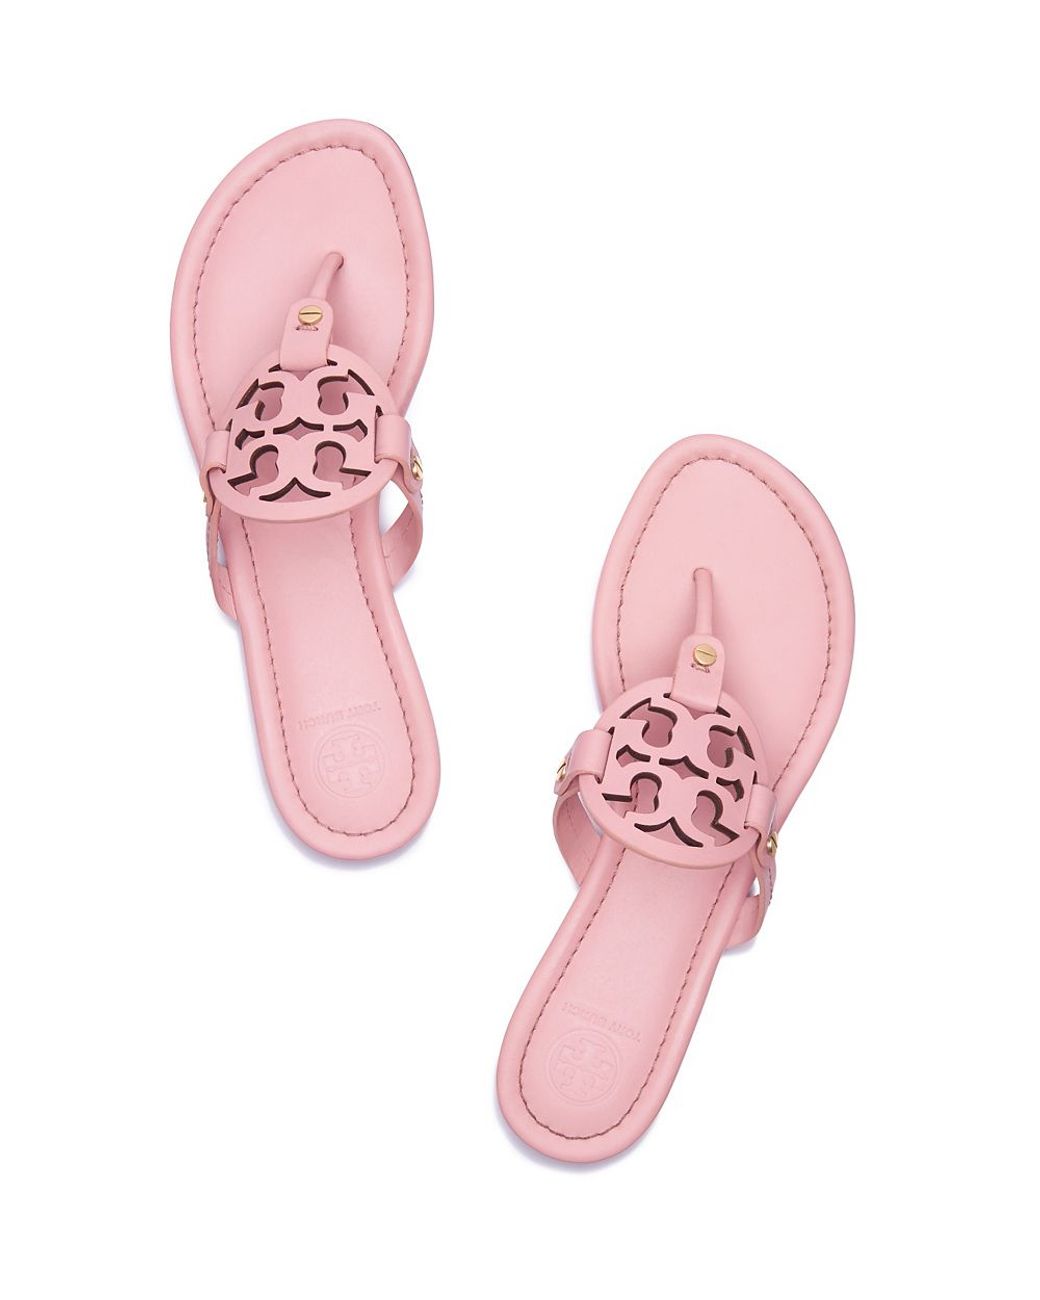 Tory Burch Pink Sandals + FREE SHIPPING, Shoes